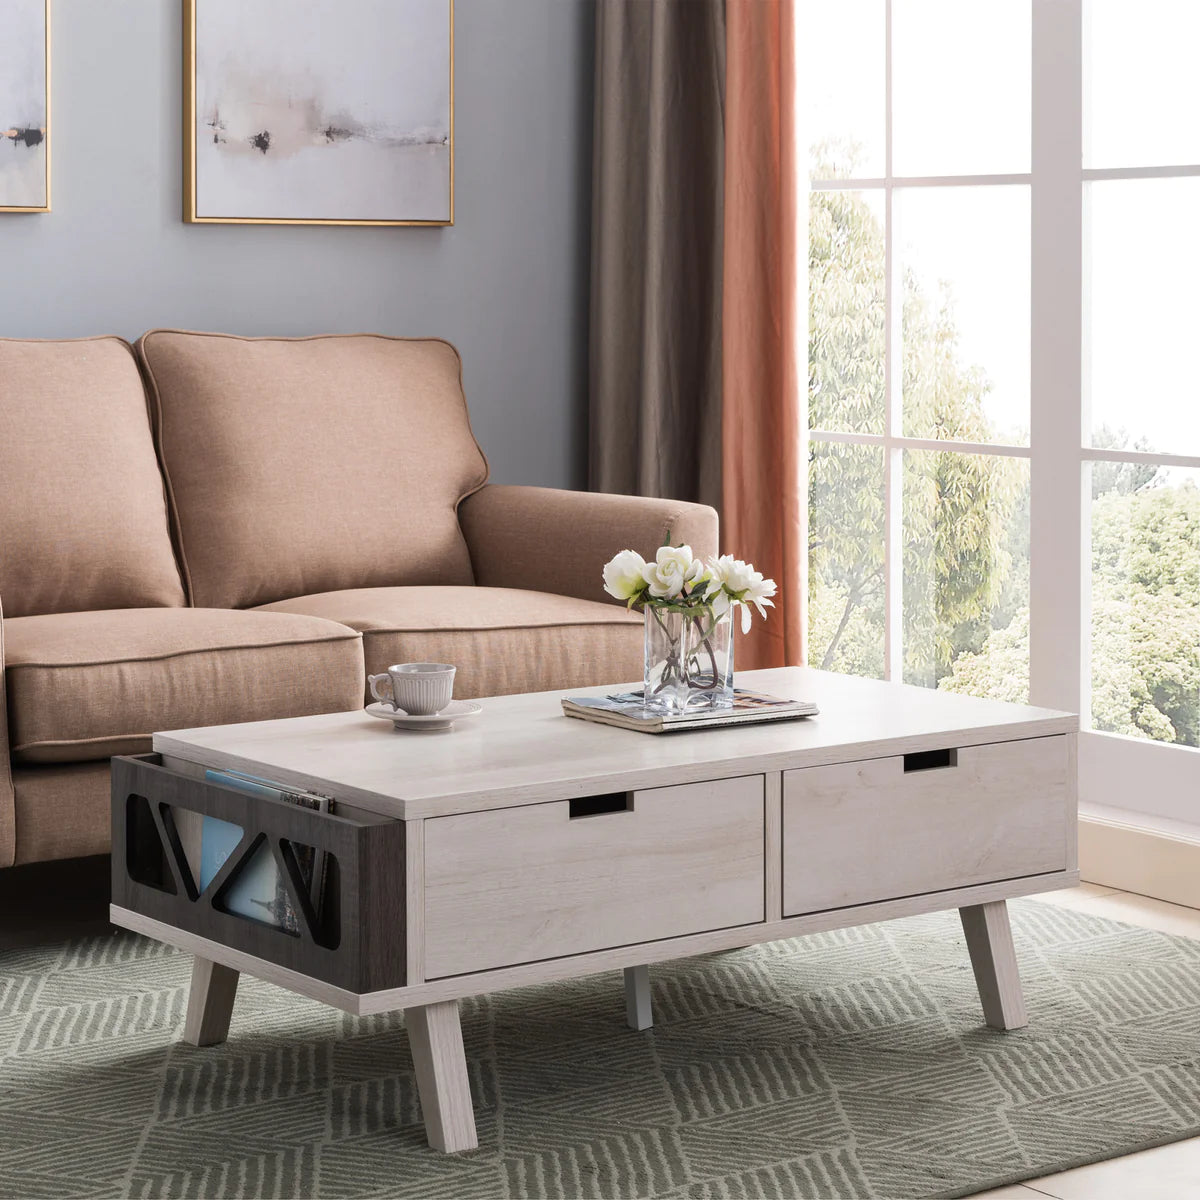 Coffee Table - Complete your living space with the perfect centerpiece